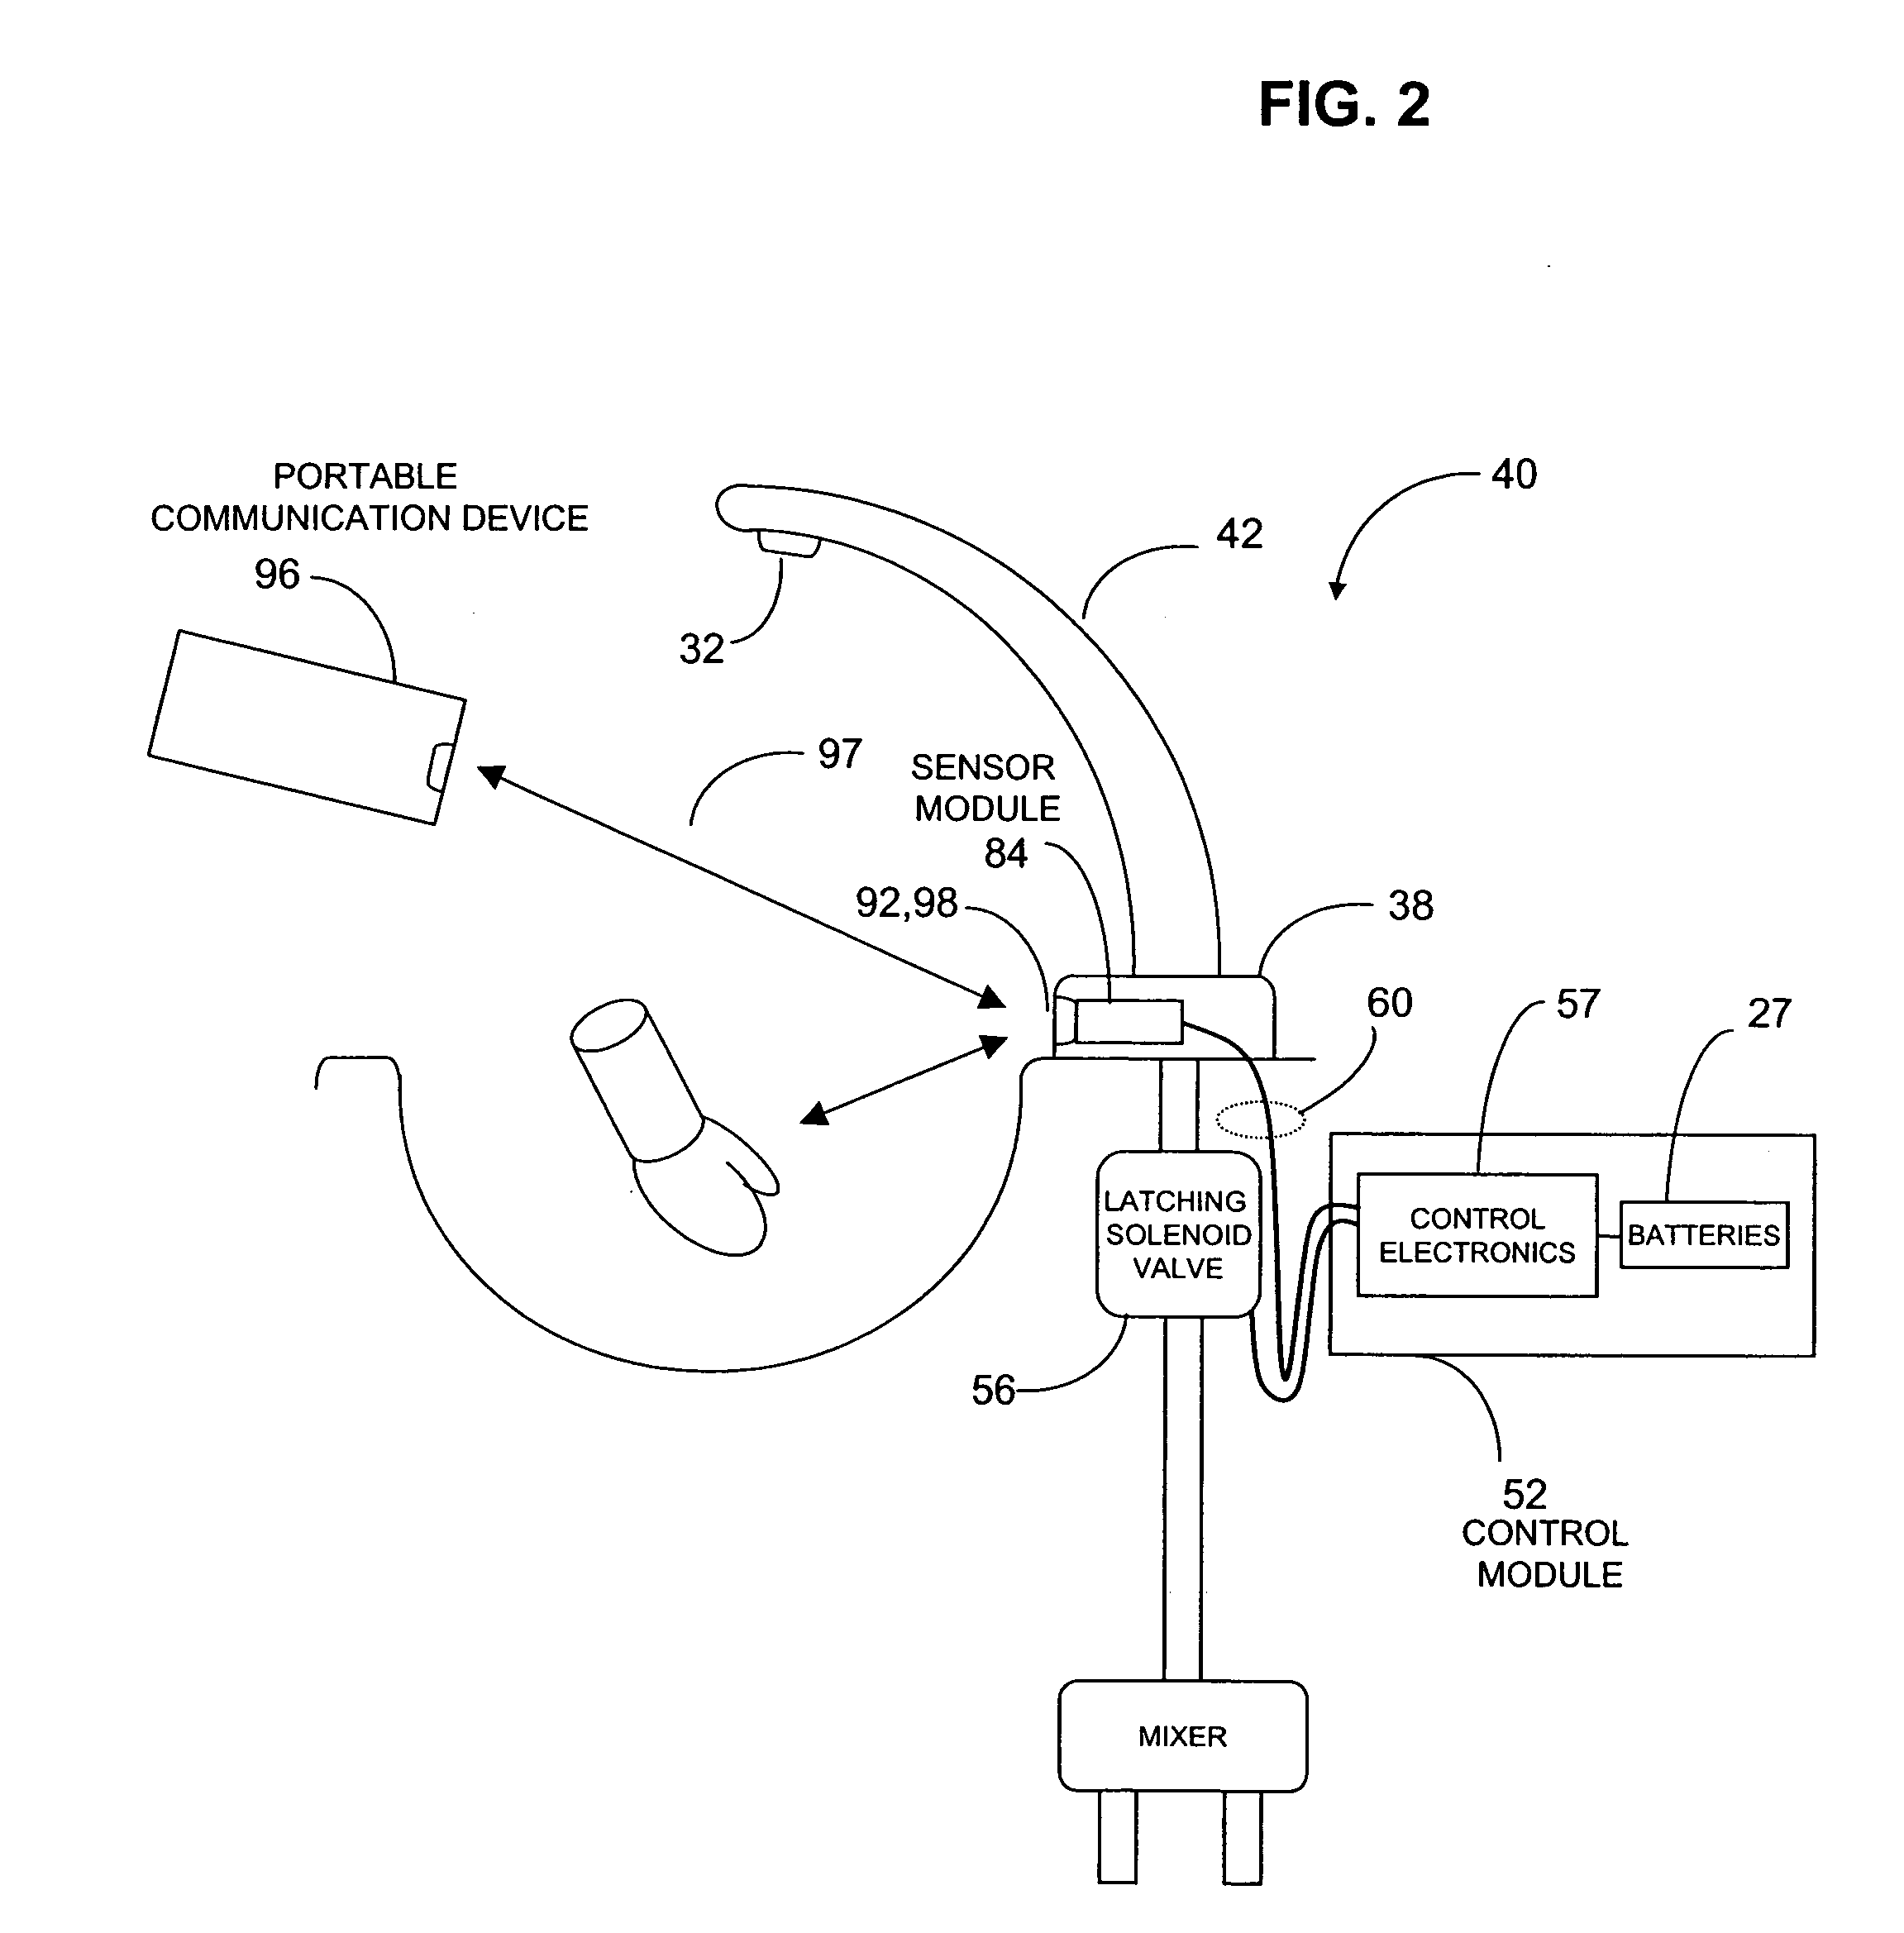 Apparatus and method of wireless data transmission